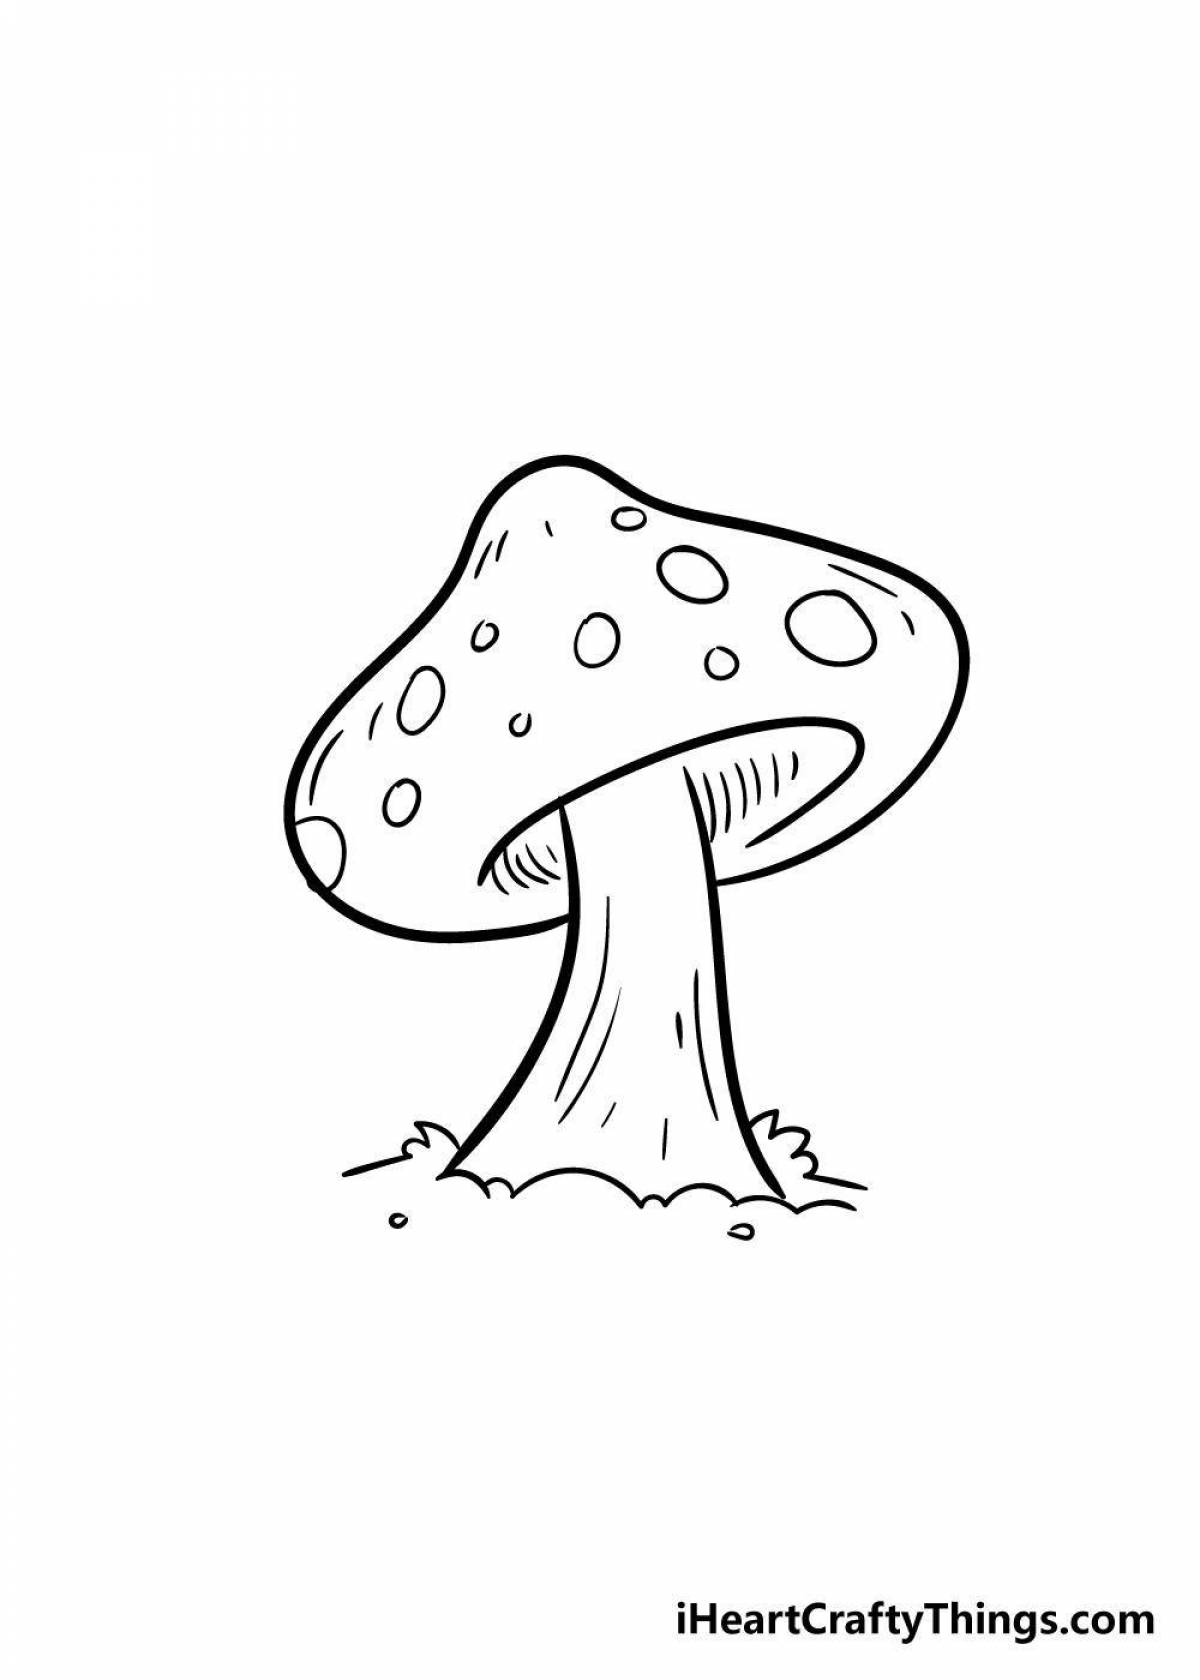 Toadstool inviting coloring page